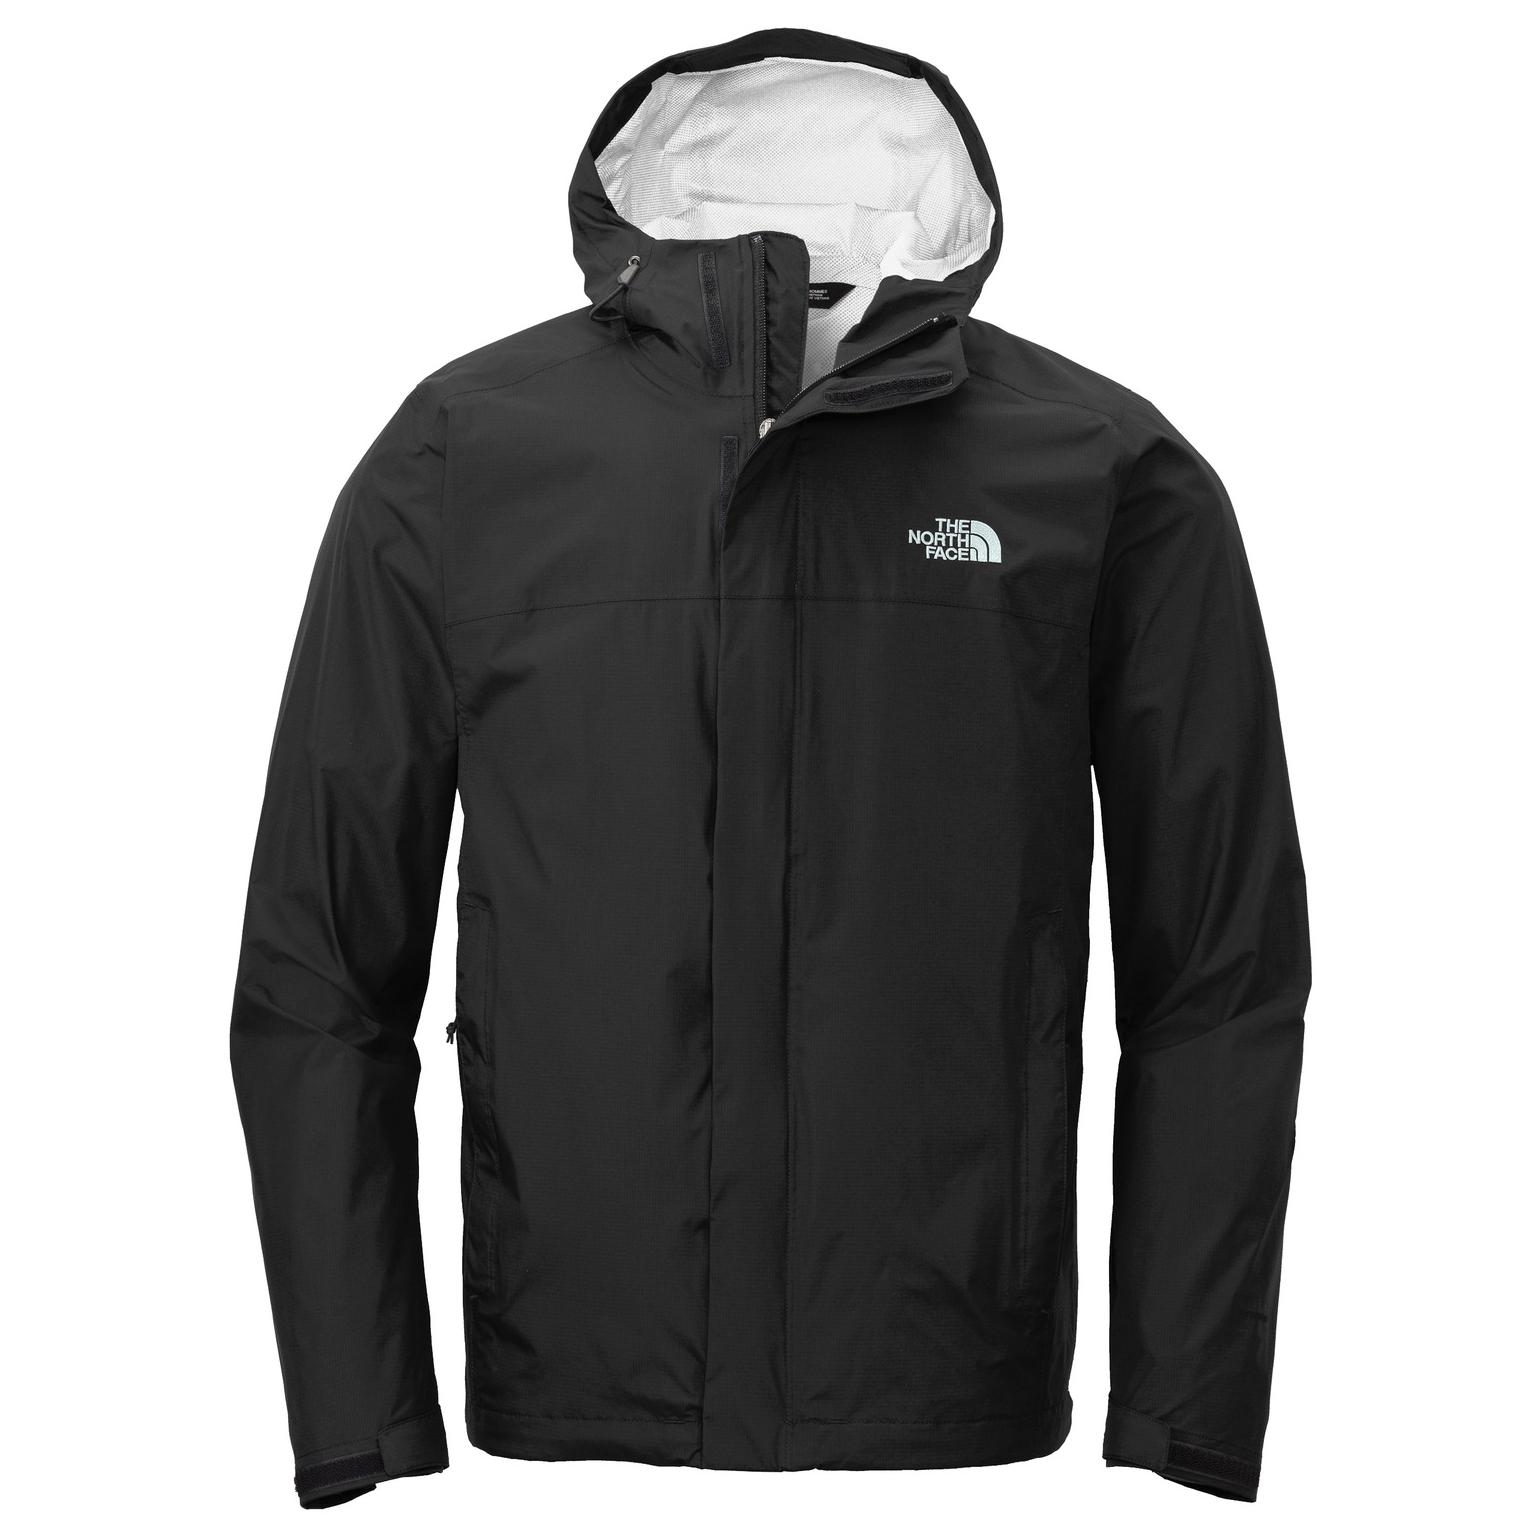 The North Face NF0A3LH4 DryVent Rain Jacket - TNF Black | Full Source